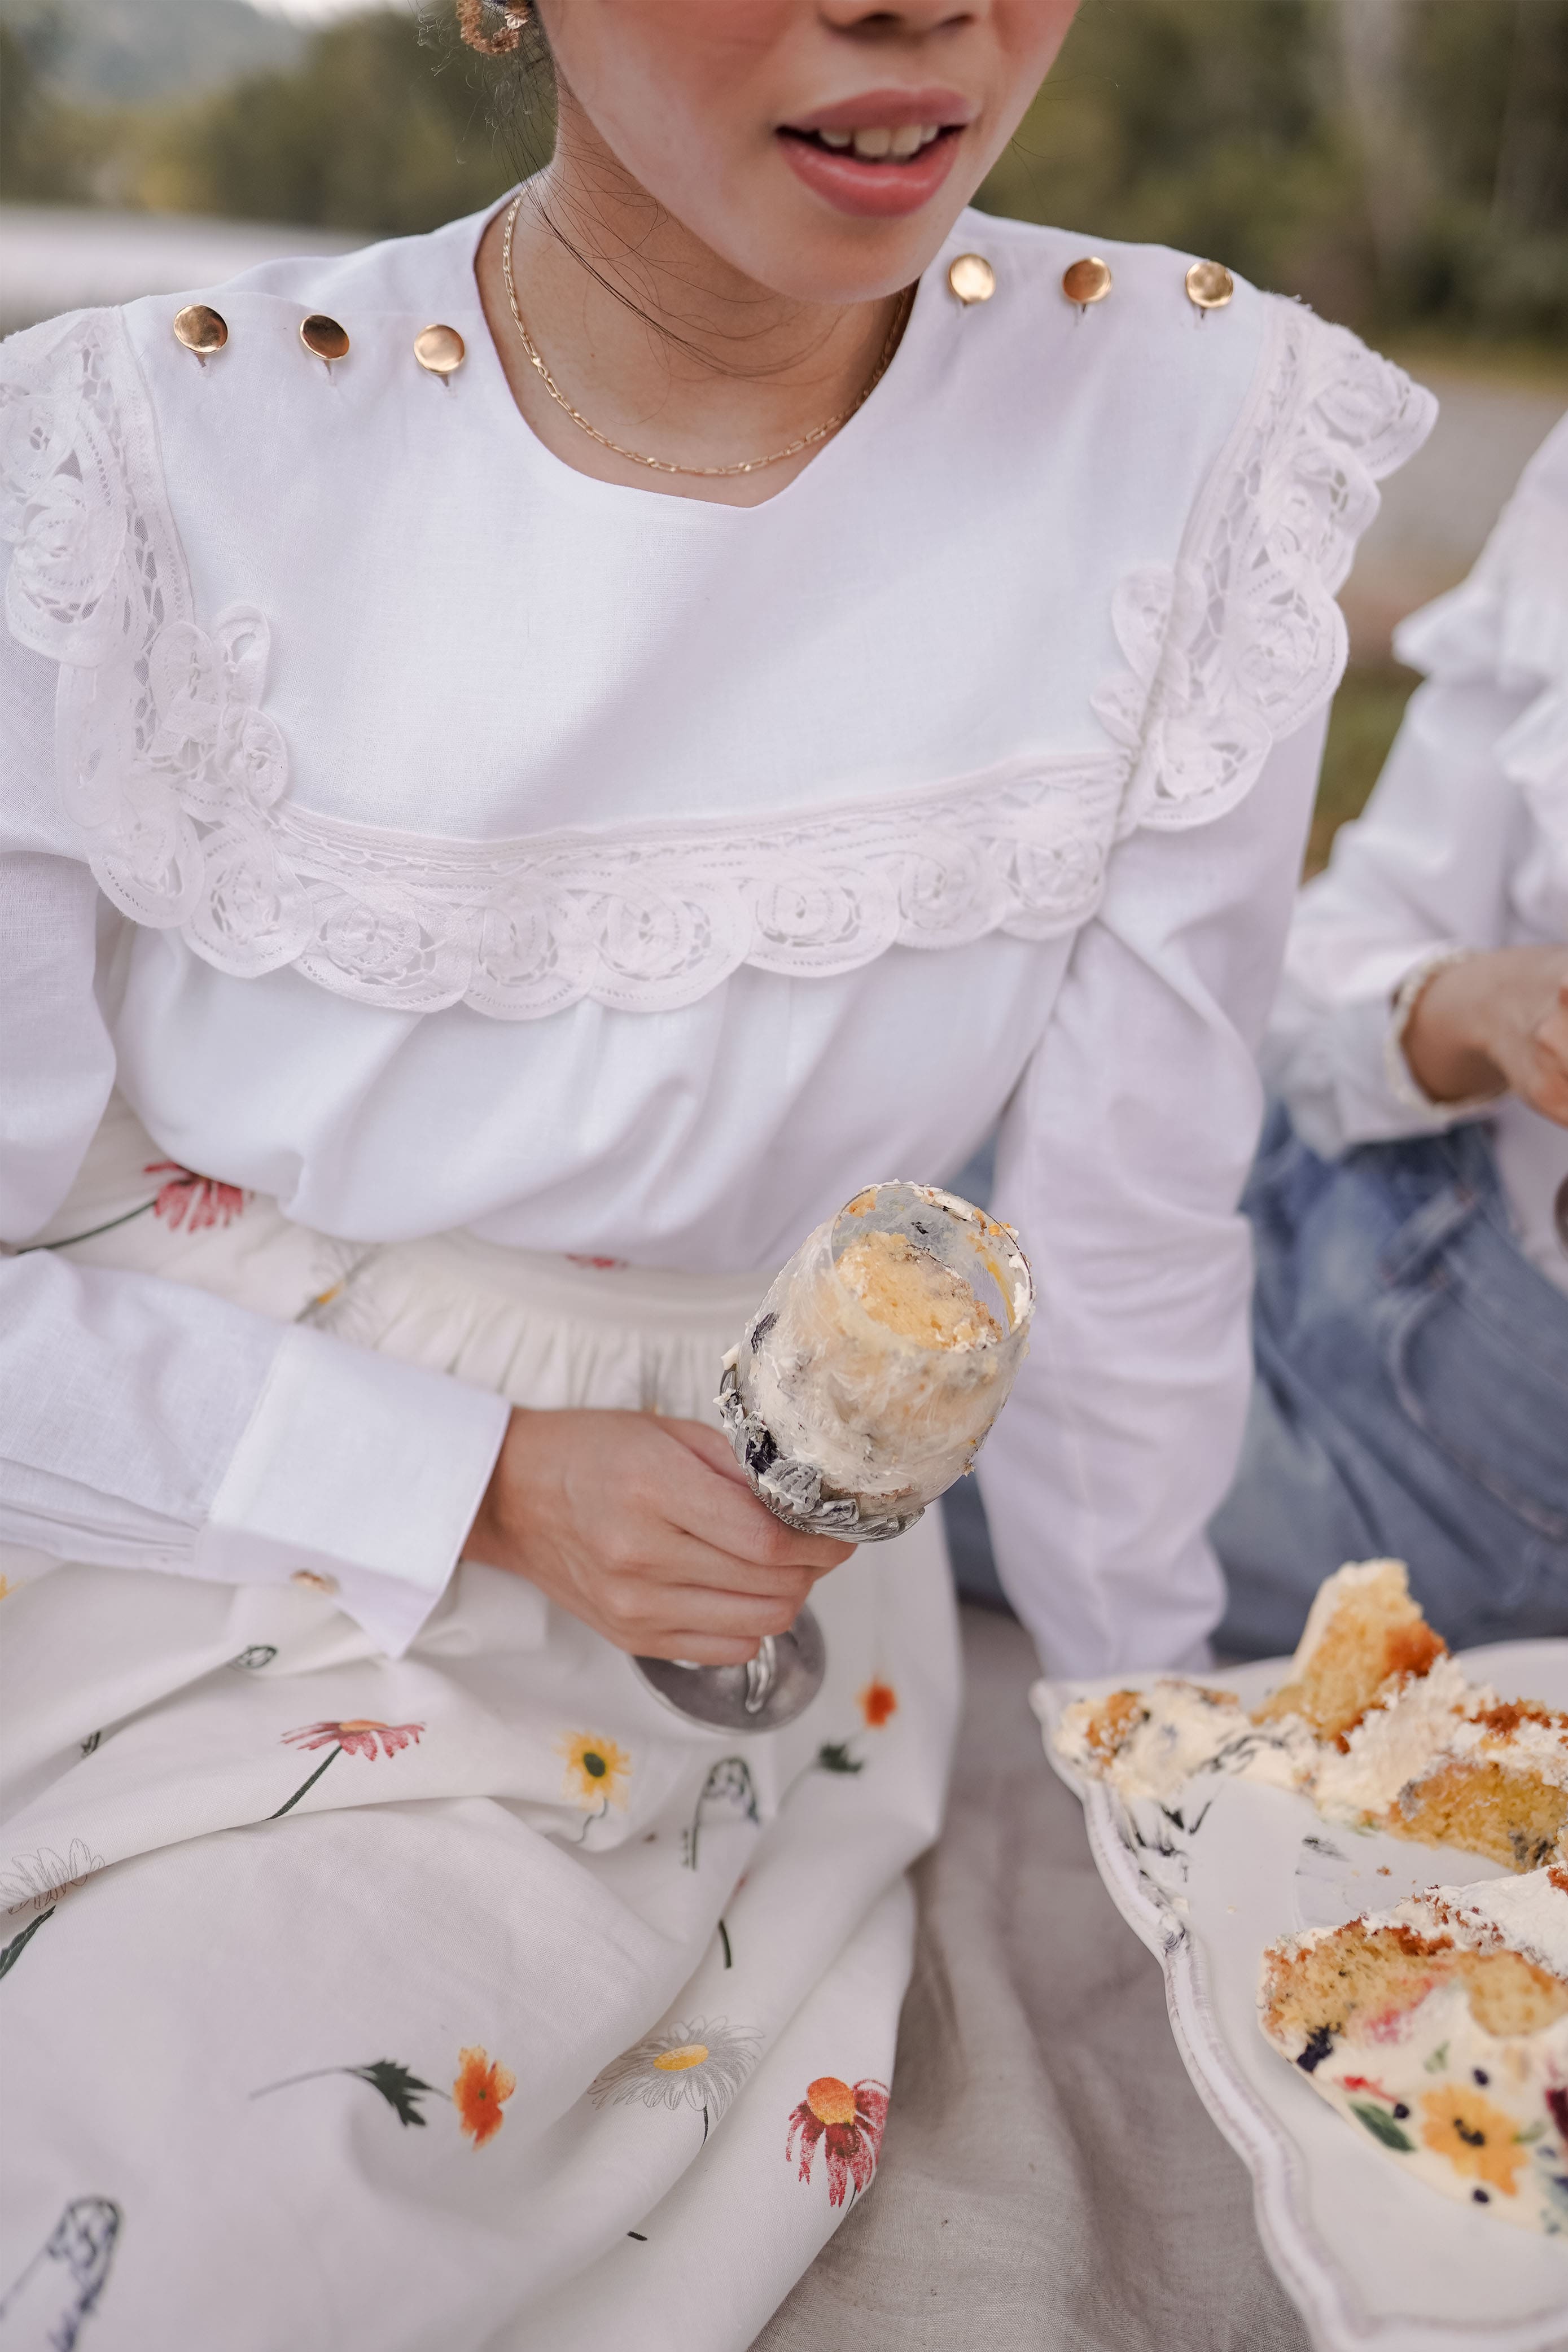 Lady having a picnic in white top from Petit Moi